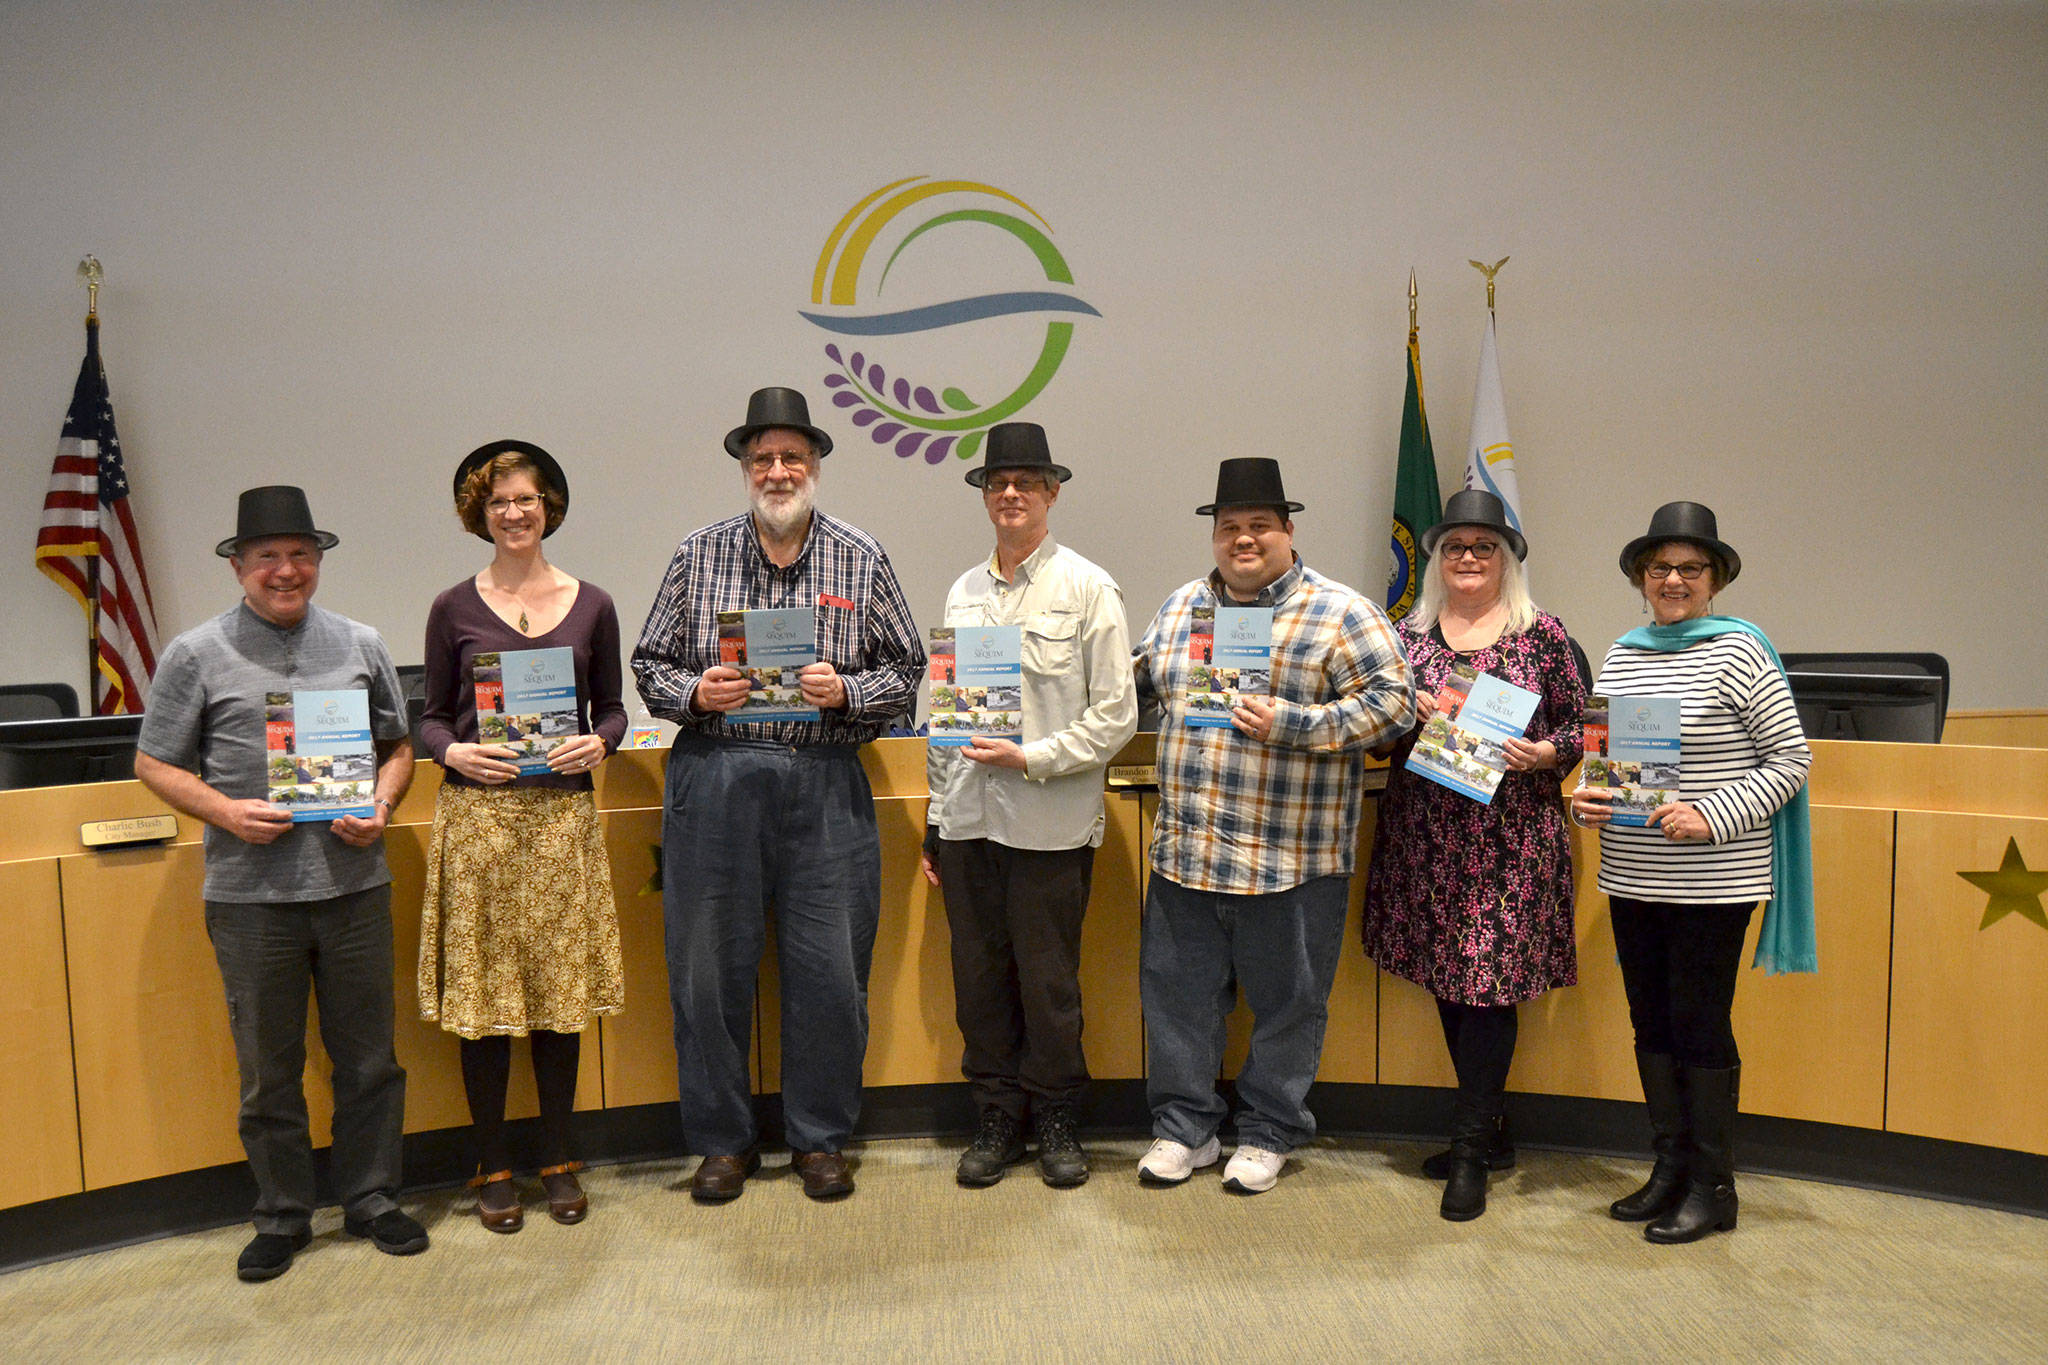 Sequim City Council members, from left, Mayor Dennis Smith, Jennifer States, Ted Miller, Bob Lake, Brandon Janisse, Pam Leonard-Ray, and Deputy Mayor Candace Pratt stand together after a presentation on the City of Sequim’s 2017 Annual Report. Matthew Nash/Olympic Peninsula News Group